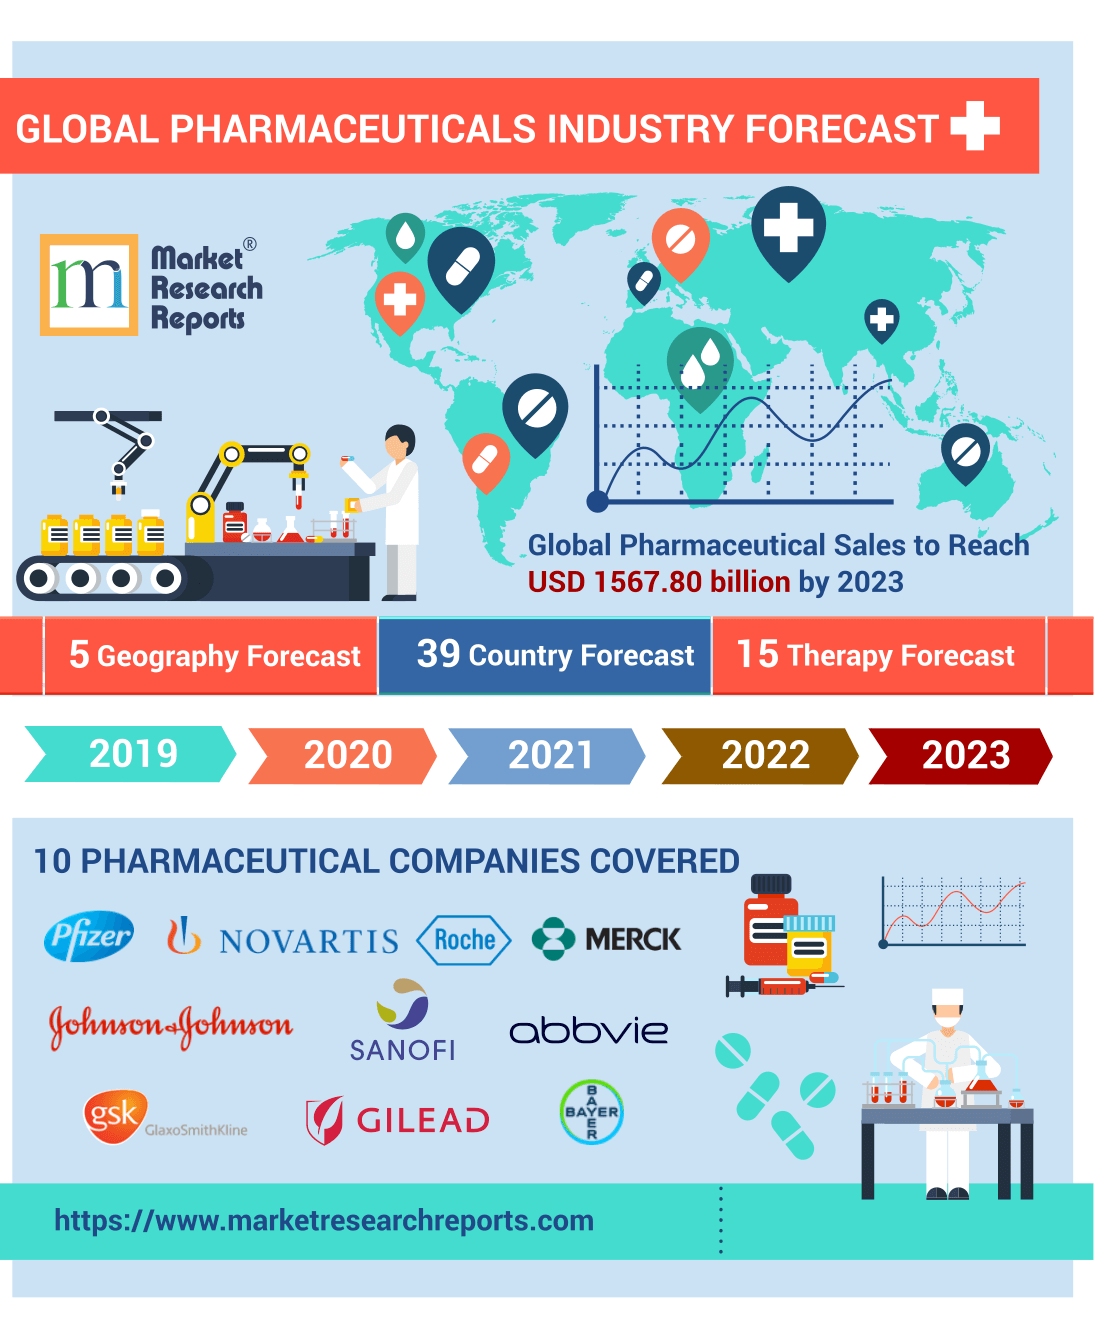 Global Pharmaceuticals Industry Forecast Infographic